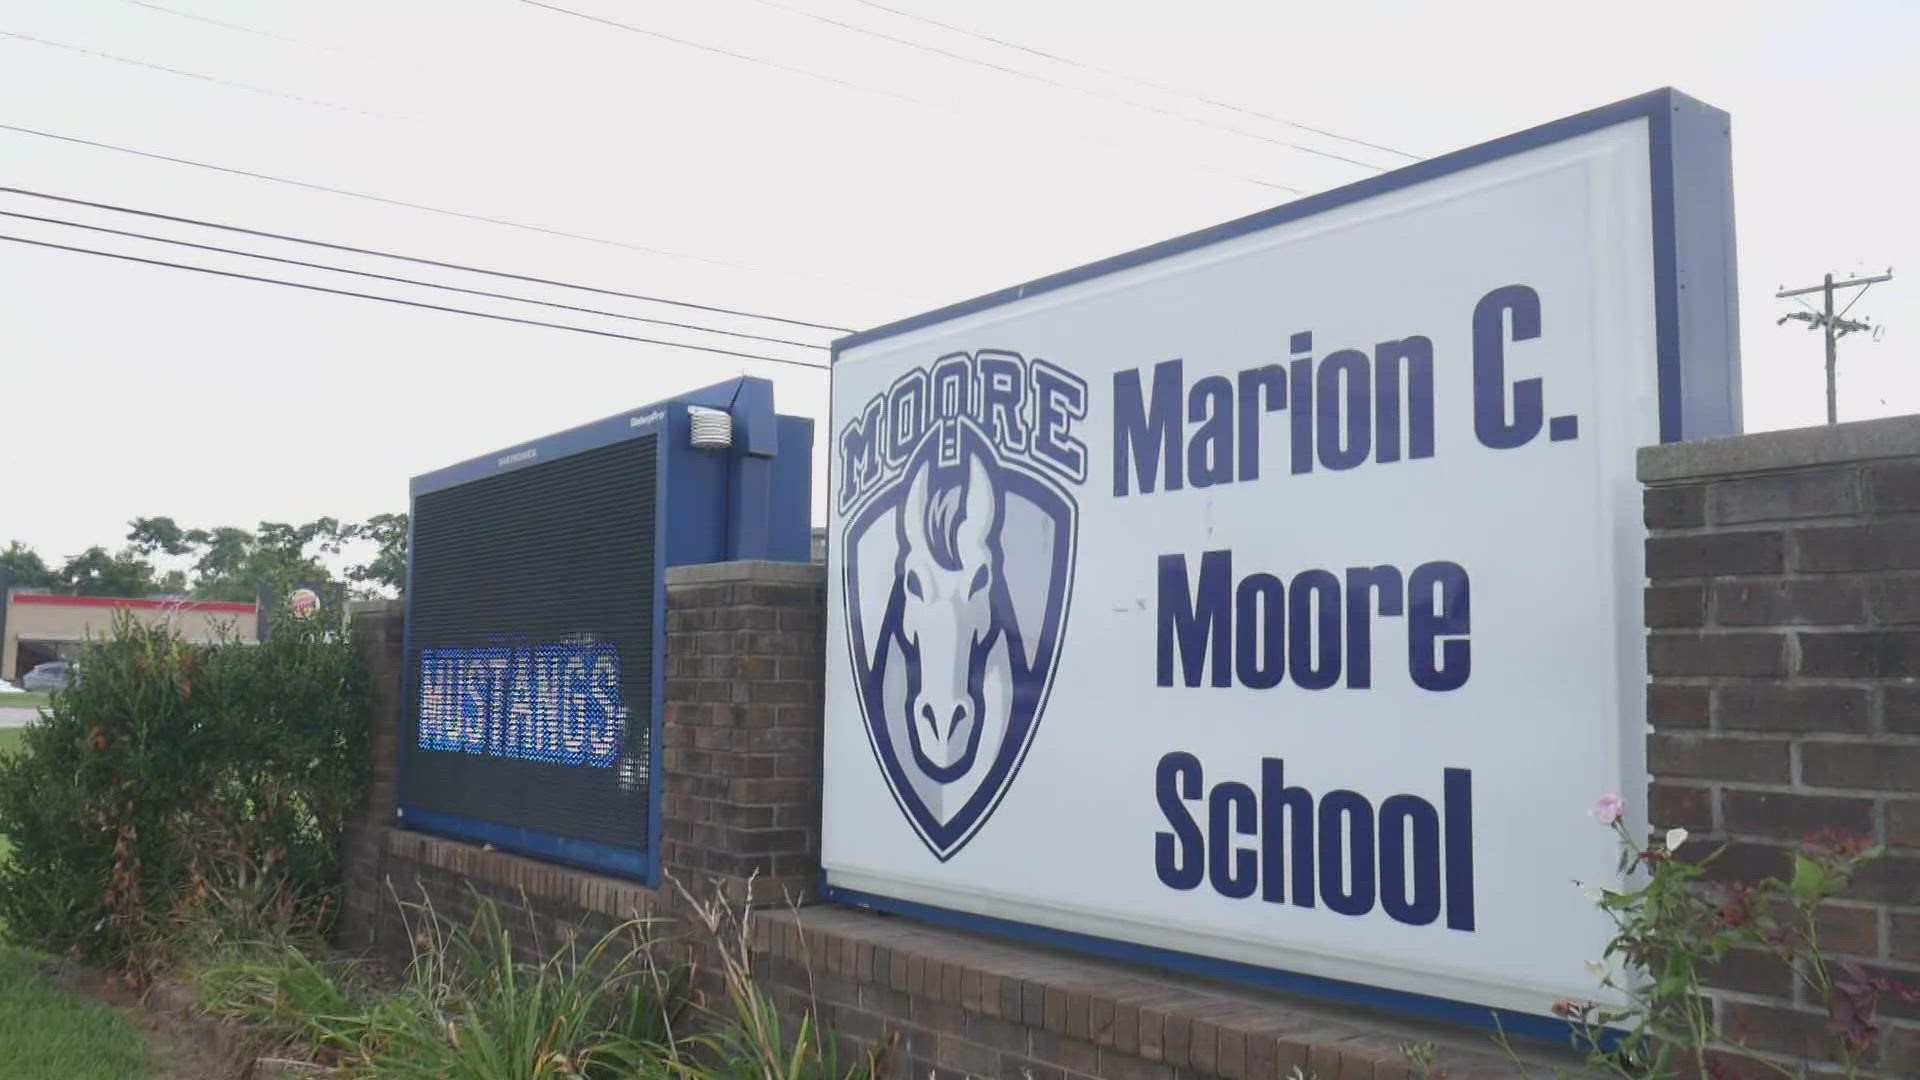 Spokesperson Renee Murphy said the teacher involved in the altercation will not be in the classroom as officials investigate the incident.